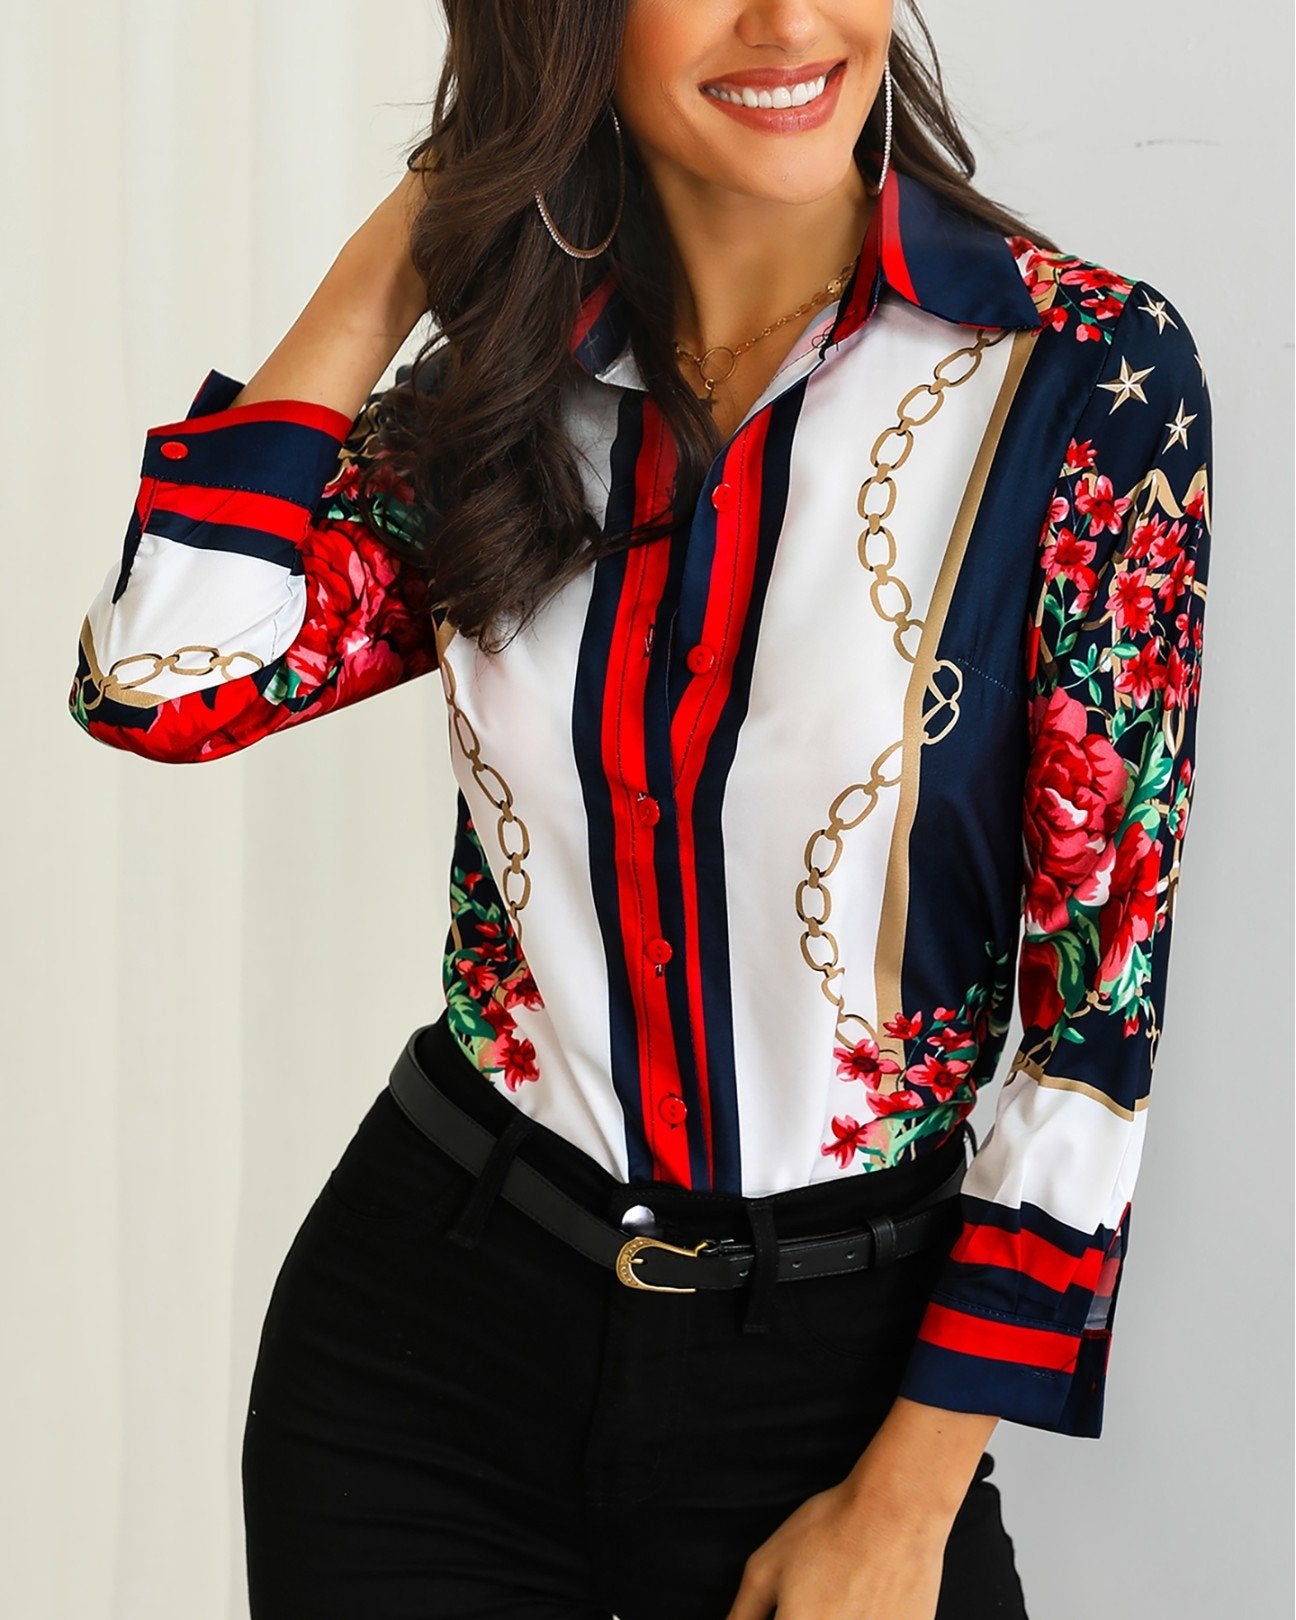 Floral & Chains Print Casual Blouse